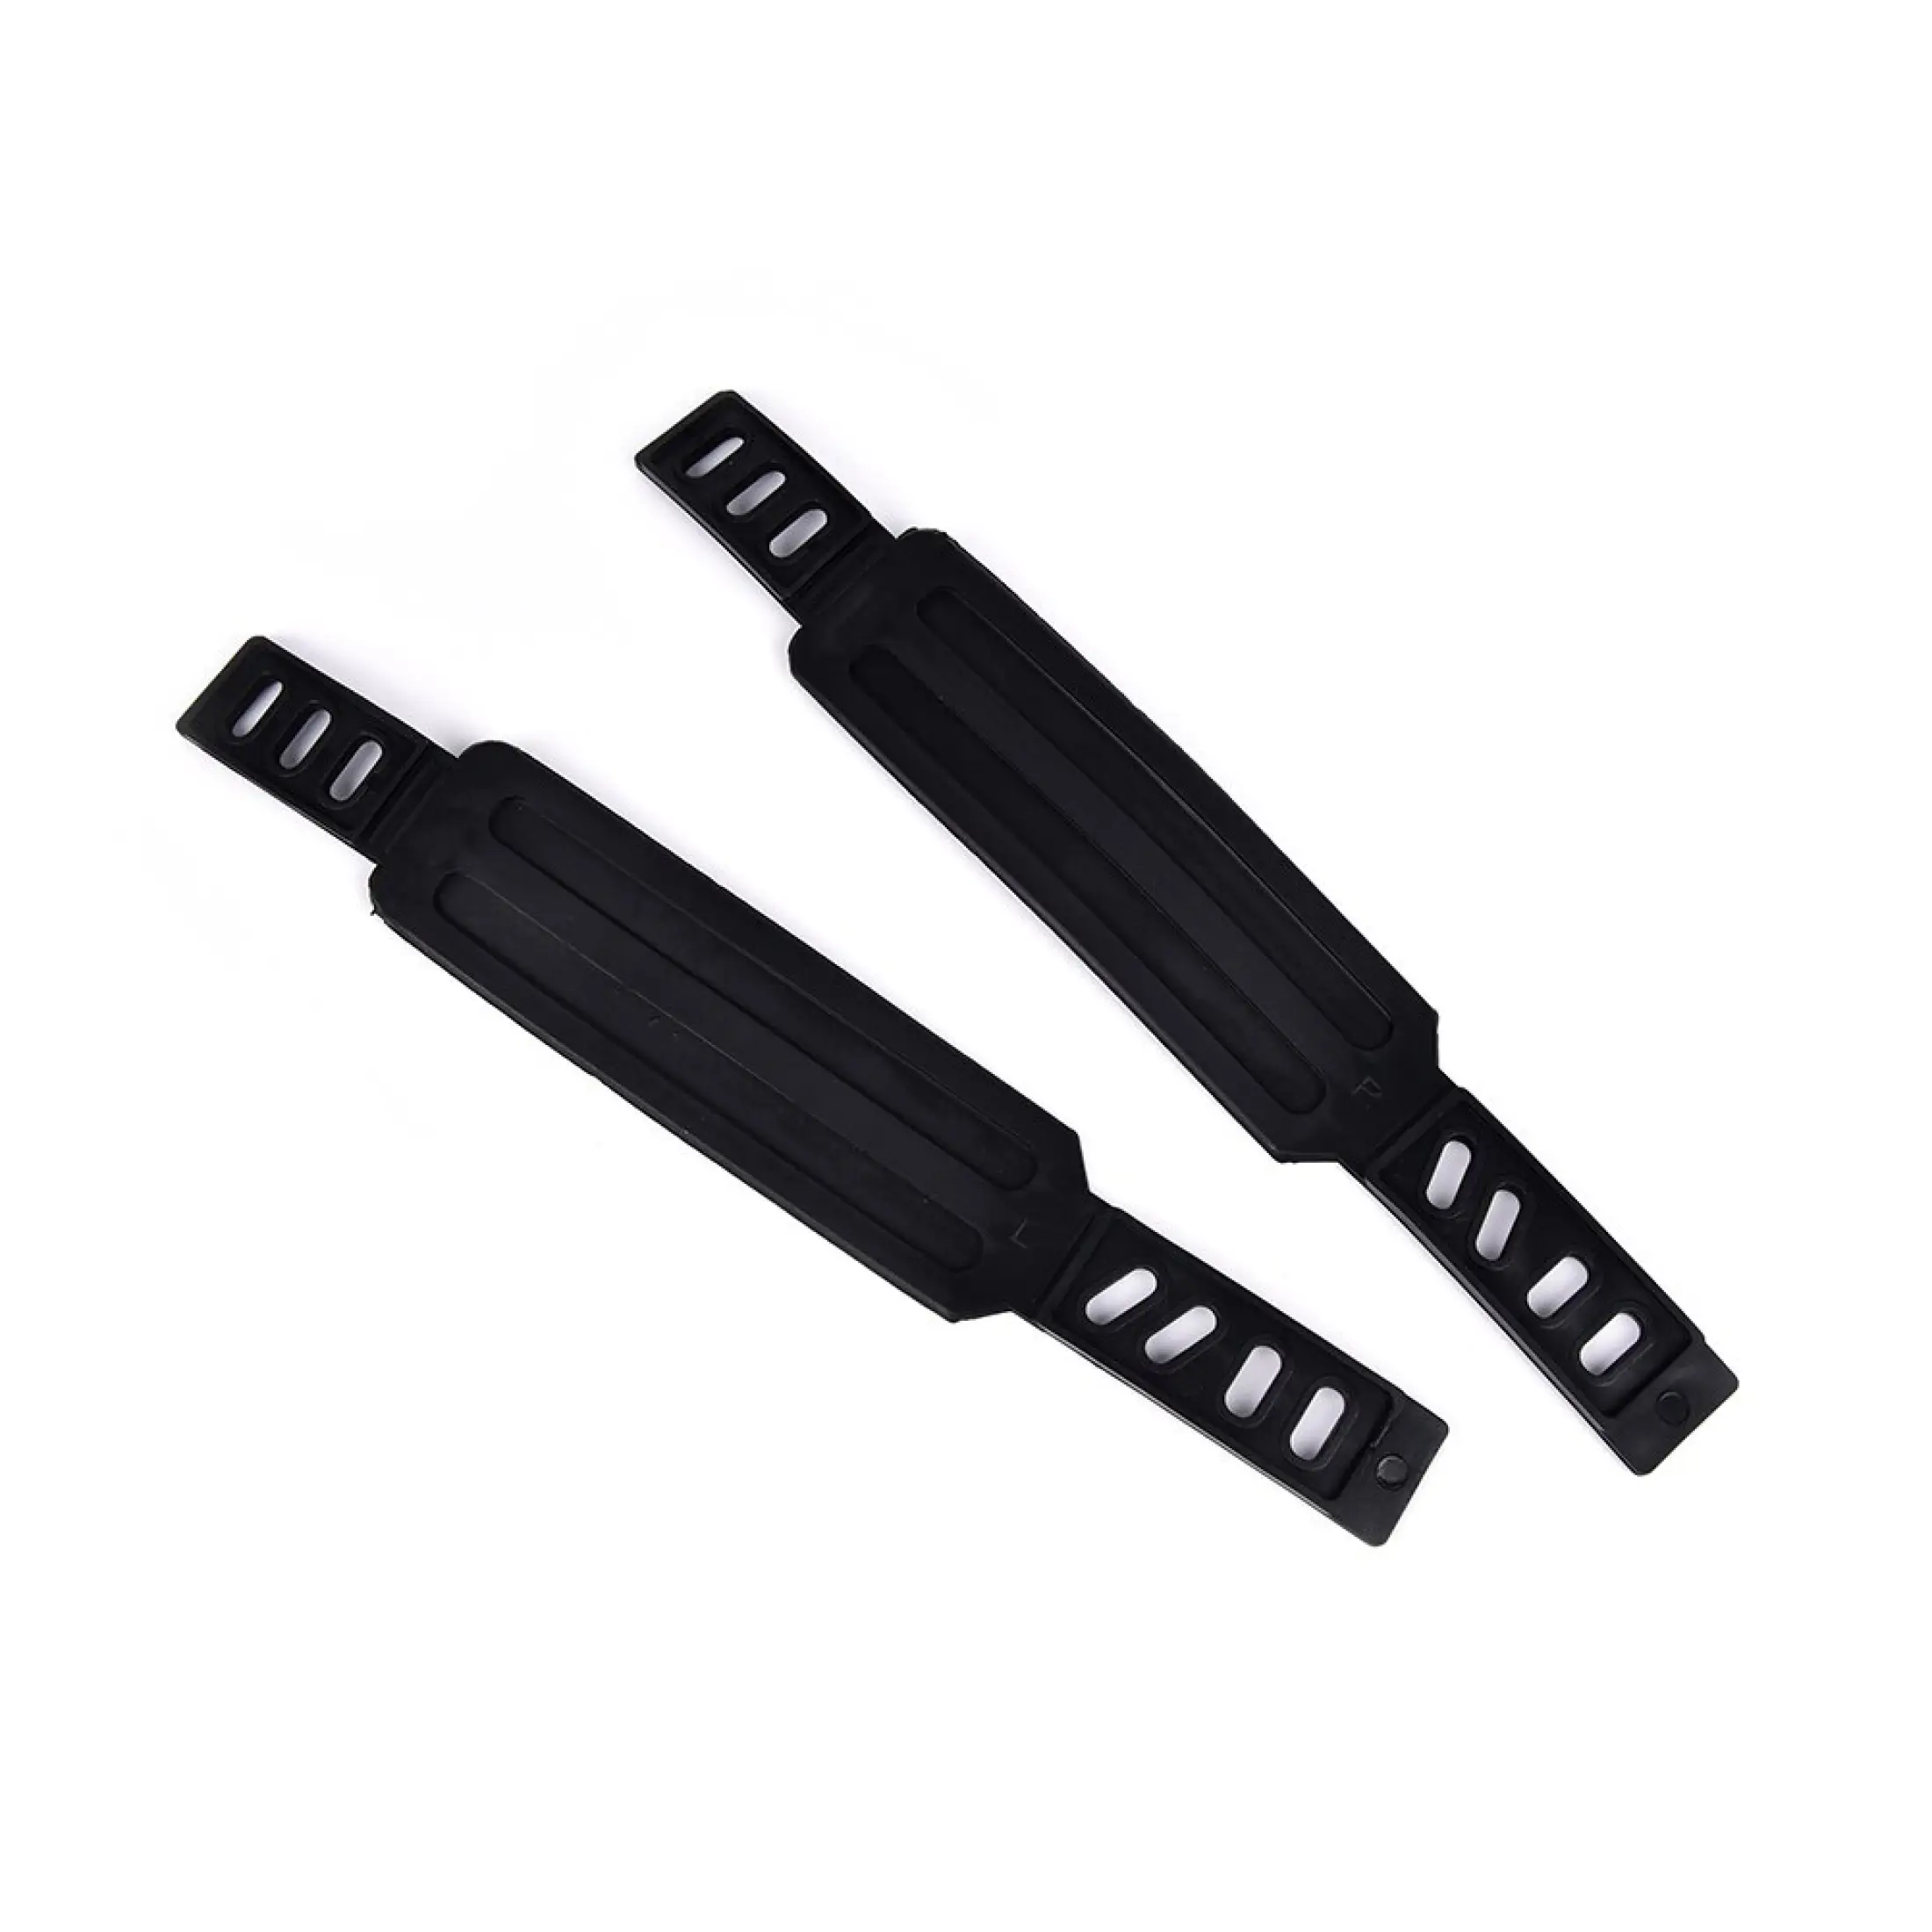 1 Pair Pedal Straps Belts Fix Bands Tape Generic For Fitness Exercise Bike SL